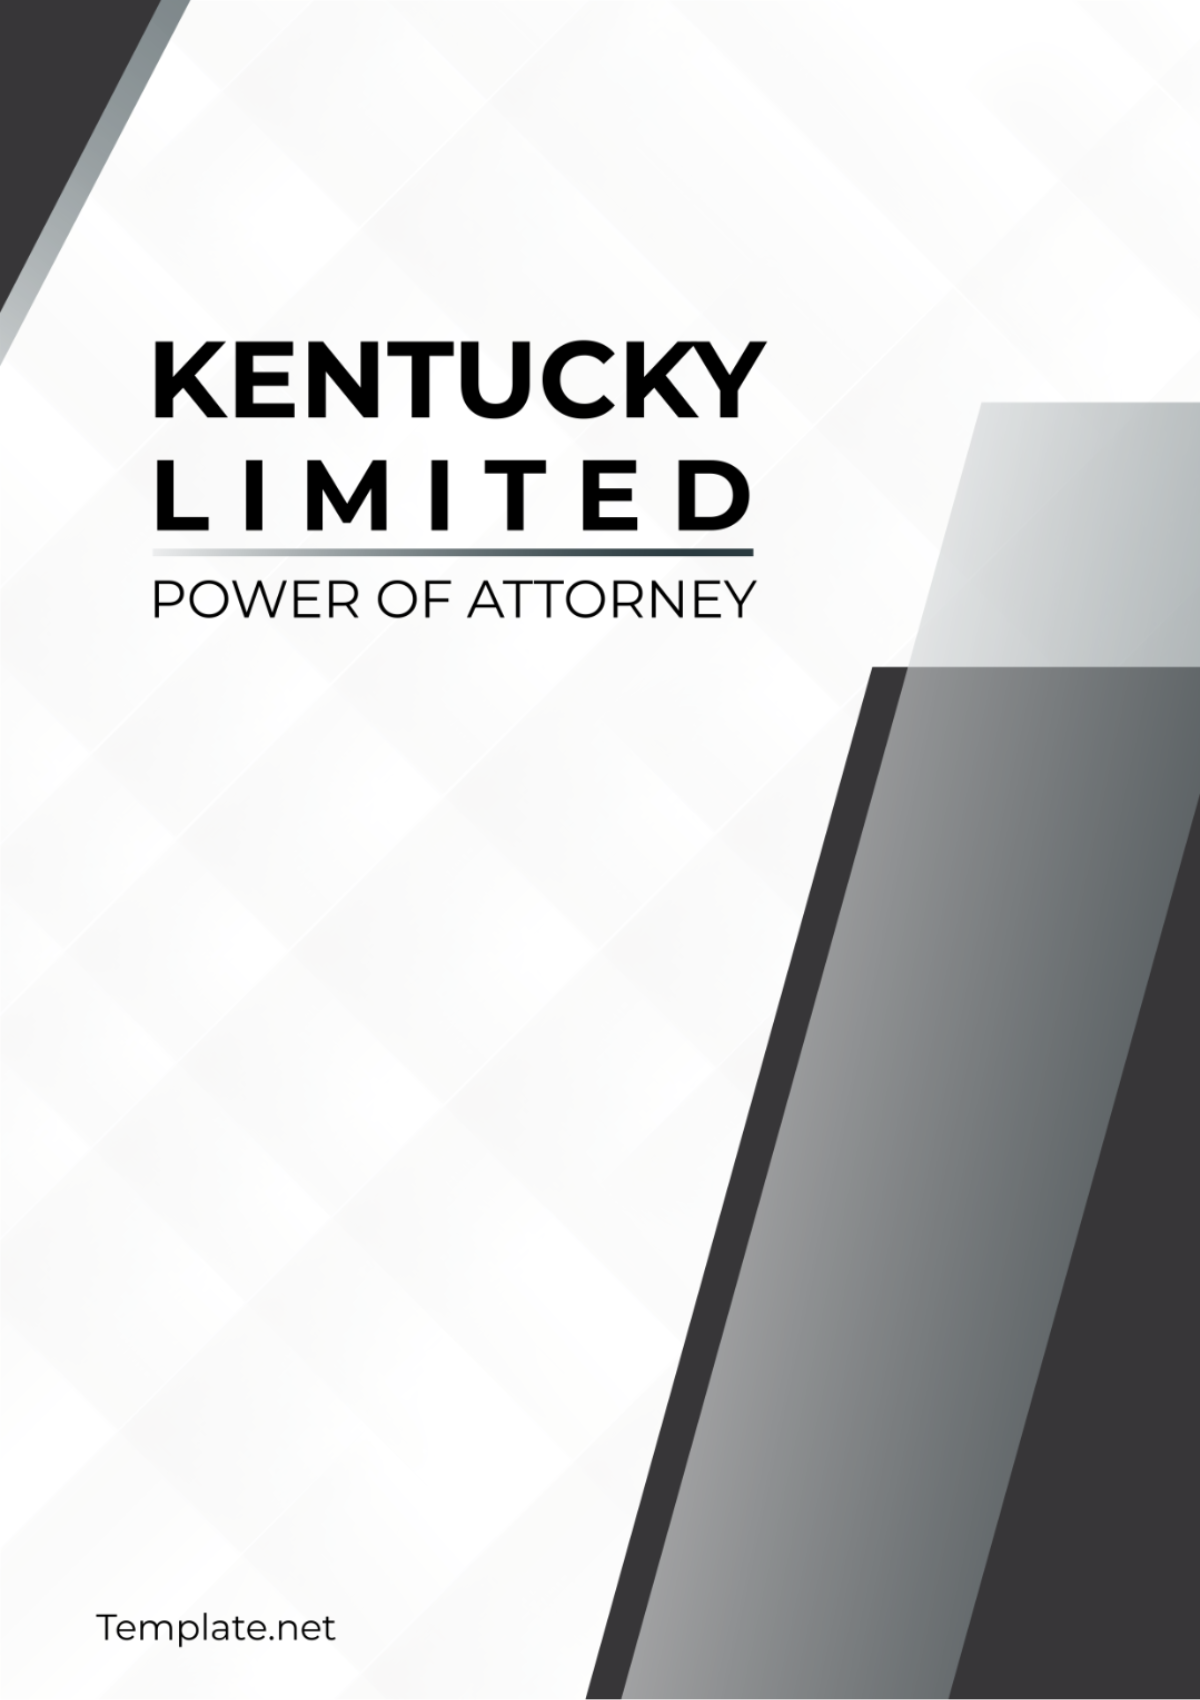 Kentucky Limited Power of Attorney Template